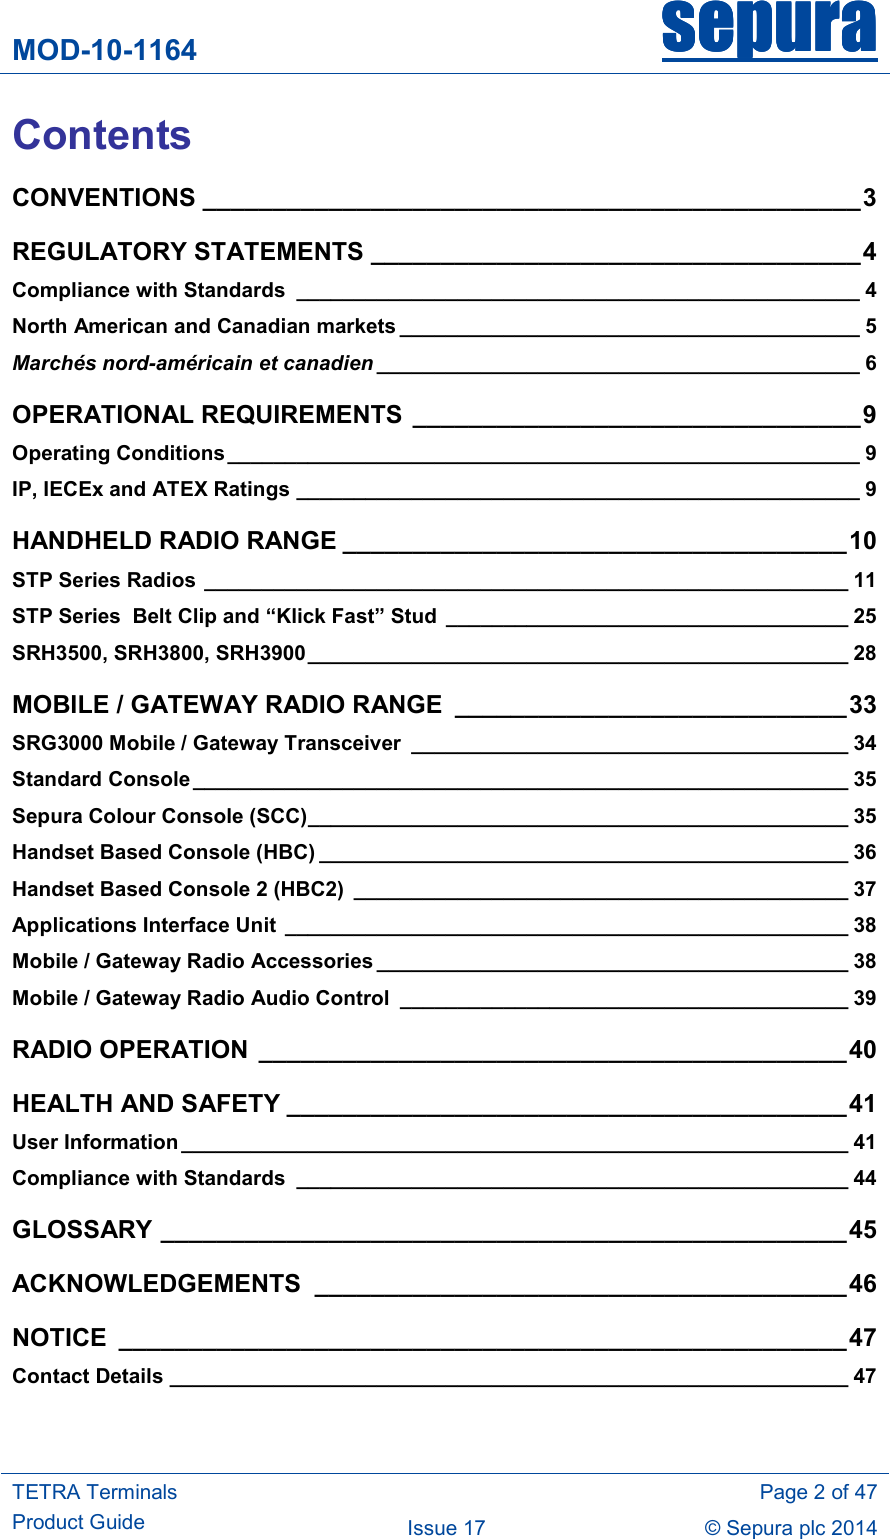 MOD-10-1164 sepurasepurasepurasepura     TETRA Terminals Product Guide   Page 2 of 47 Issue 17  © Sepura plc 2014   Contents CONVENTIONS _______________________________________________ 3 REGULATORY STATEMENTS ___________________________________ 4 Compliance with Standards  _________________________________________________ 4 North American and Canadian markets ________________________________________ 5 Marchés nord-américain et canadien __________________________________________ 6 OPERATIONAL REQUIREMENTS  ________________________________ 9 Operating Conditions _______________________________________________________ 9 IP, IECEx and ATEX Ratings _________________________________________________ 9 HANDHELD RADIO RANGE ____________________________________ 10 STP Series Radios ________________________________________________________ 11 STP Series  Belt Clip and “Klick Fast” Stud  ___________________________________ 25 SRH3500, SRH3800, SRH3900 _______________________________________________ 28 MOBILE / GATEWAY RADIO RANGE  ____________________________ 33 SRG3000 Mobile / Gateway Transceiver  ______________________________________ 34 Standard Console _________________________________________________________ 35 Sepura Colour Console (SCC) _______________________________________________ 35 Handset Based Console (HBC) ______________________________________________ 36 Handset Based Console 2 (HBC2)  ___________________________________________ 37 Applications Interface Unit  _________________________________________________ 38 Mobile / Gateway Radio Accessories _________________________________________ 38 Mobile / Gateway Radio Audio Control  _______________________________________ 39 RADIO OPERATION  __________________________________________ 40 HEALTH AND SAFETY ________________________________________ 41 User Information __________________________________________________________ 41 Compliance with Standards  ________________________________________________ 44 GLOSSARY _________________________________________________ 45 ACKNOWLEDGEMENTS  ______________________________________ 46 NOTICE  ____________________________________________________ 47 Contact Details ___________________________________________________________ 47 